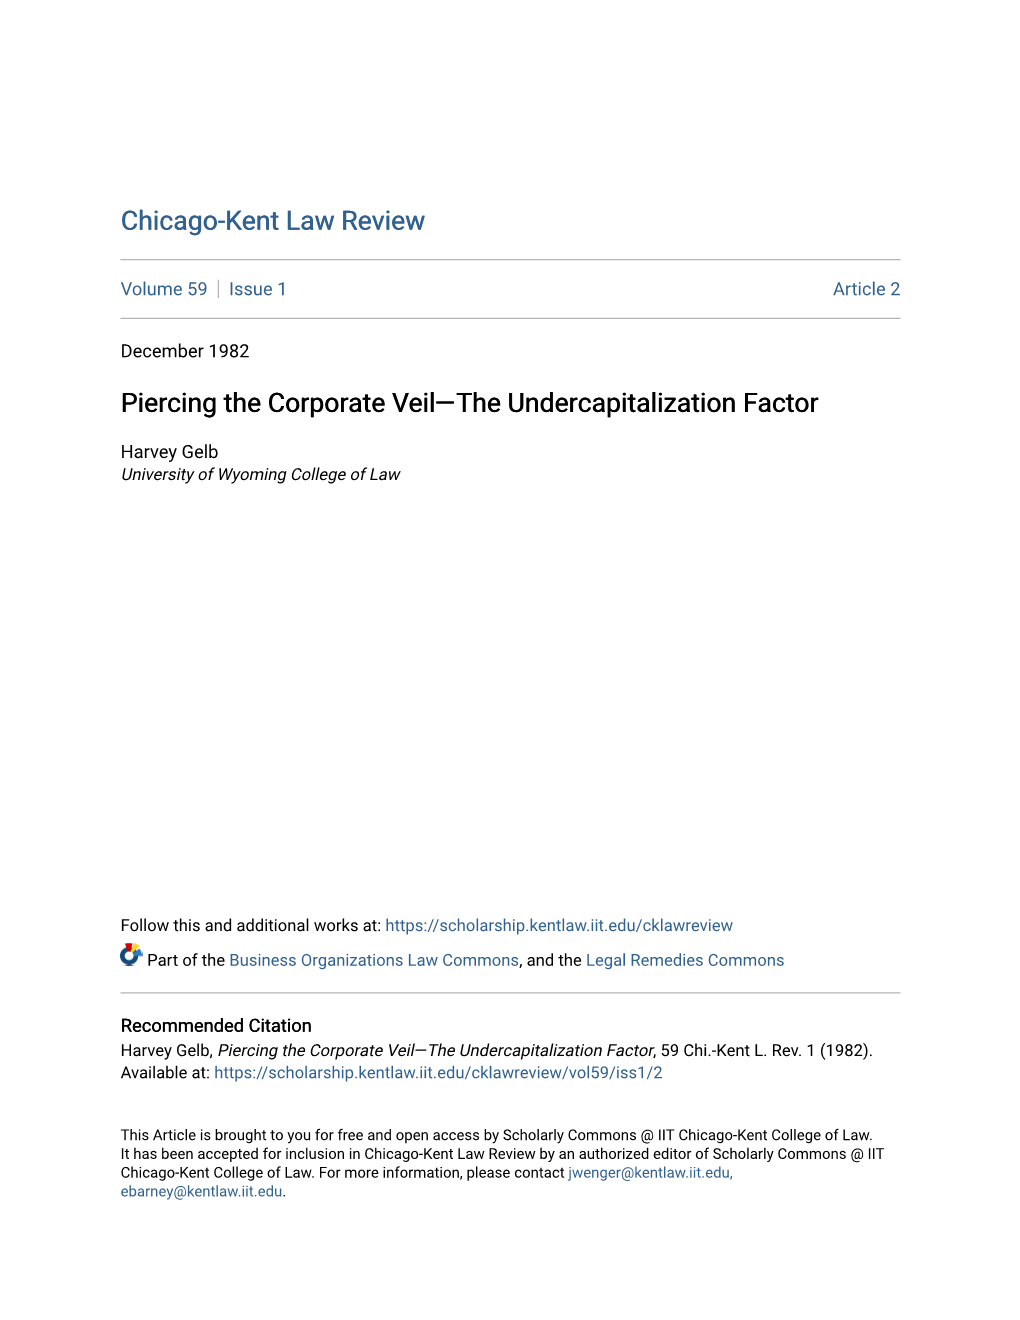 Piercing the Corporate Veil—The Undercapitalization Factor